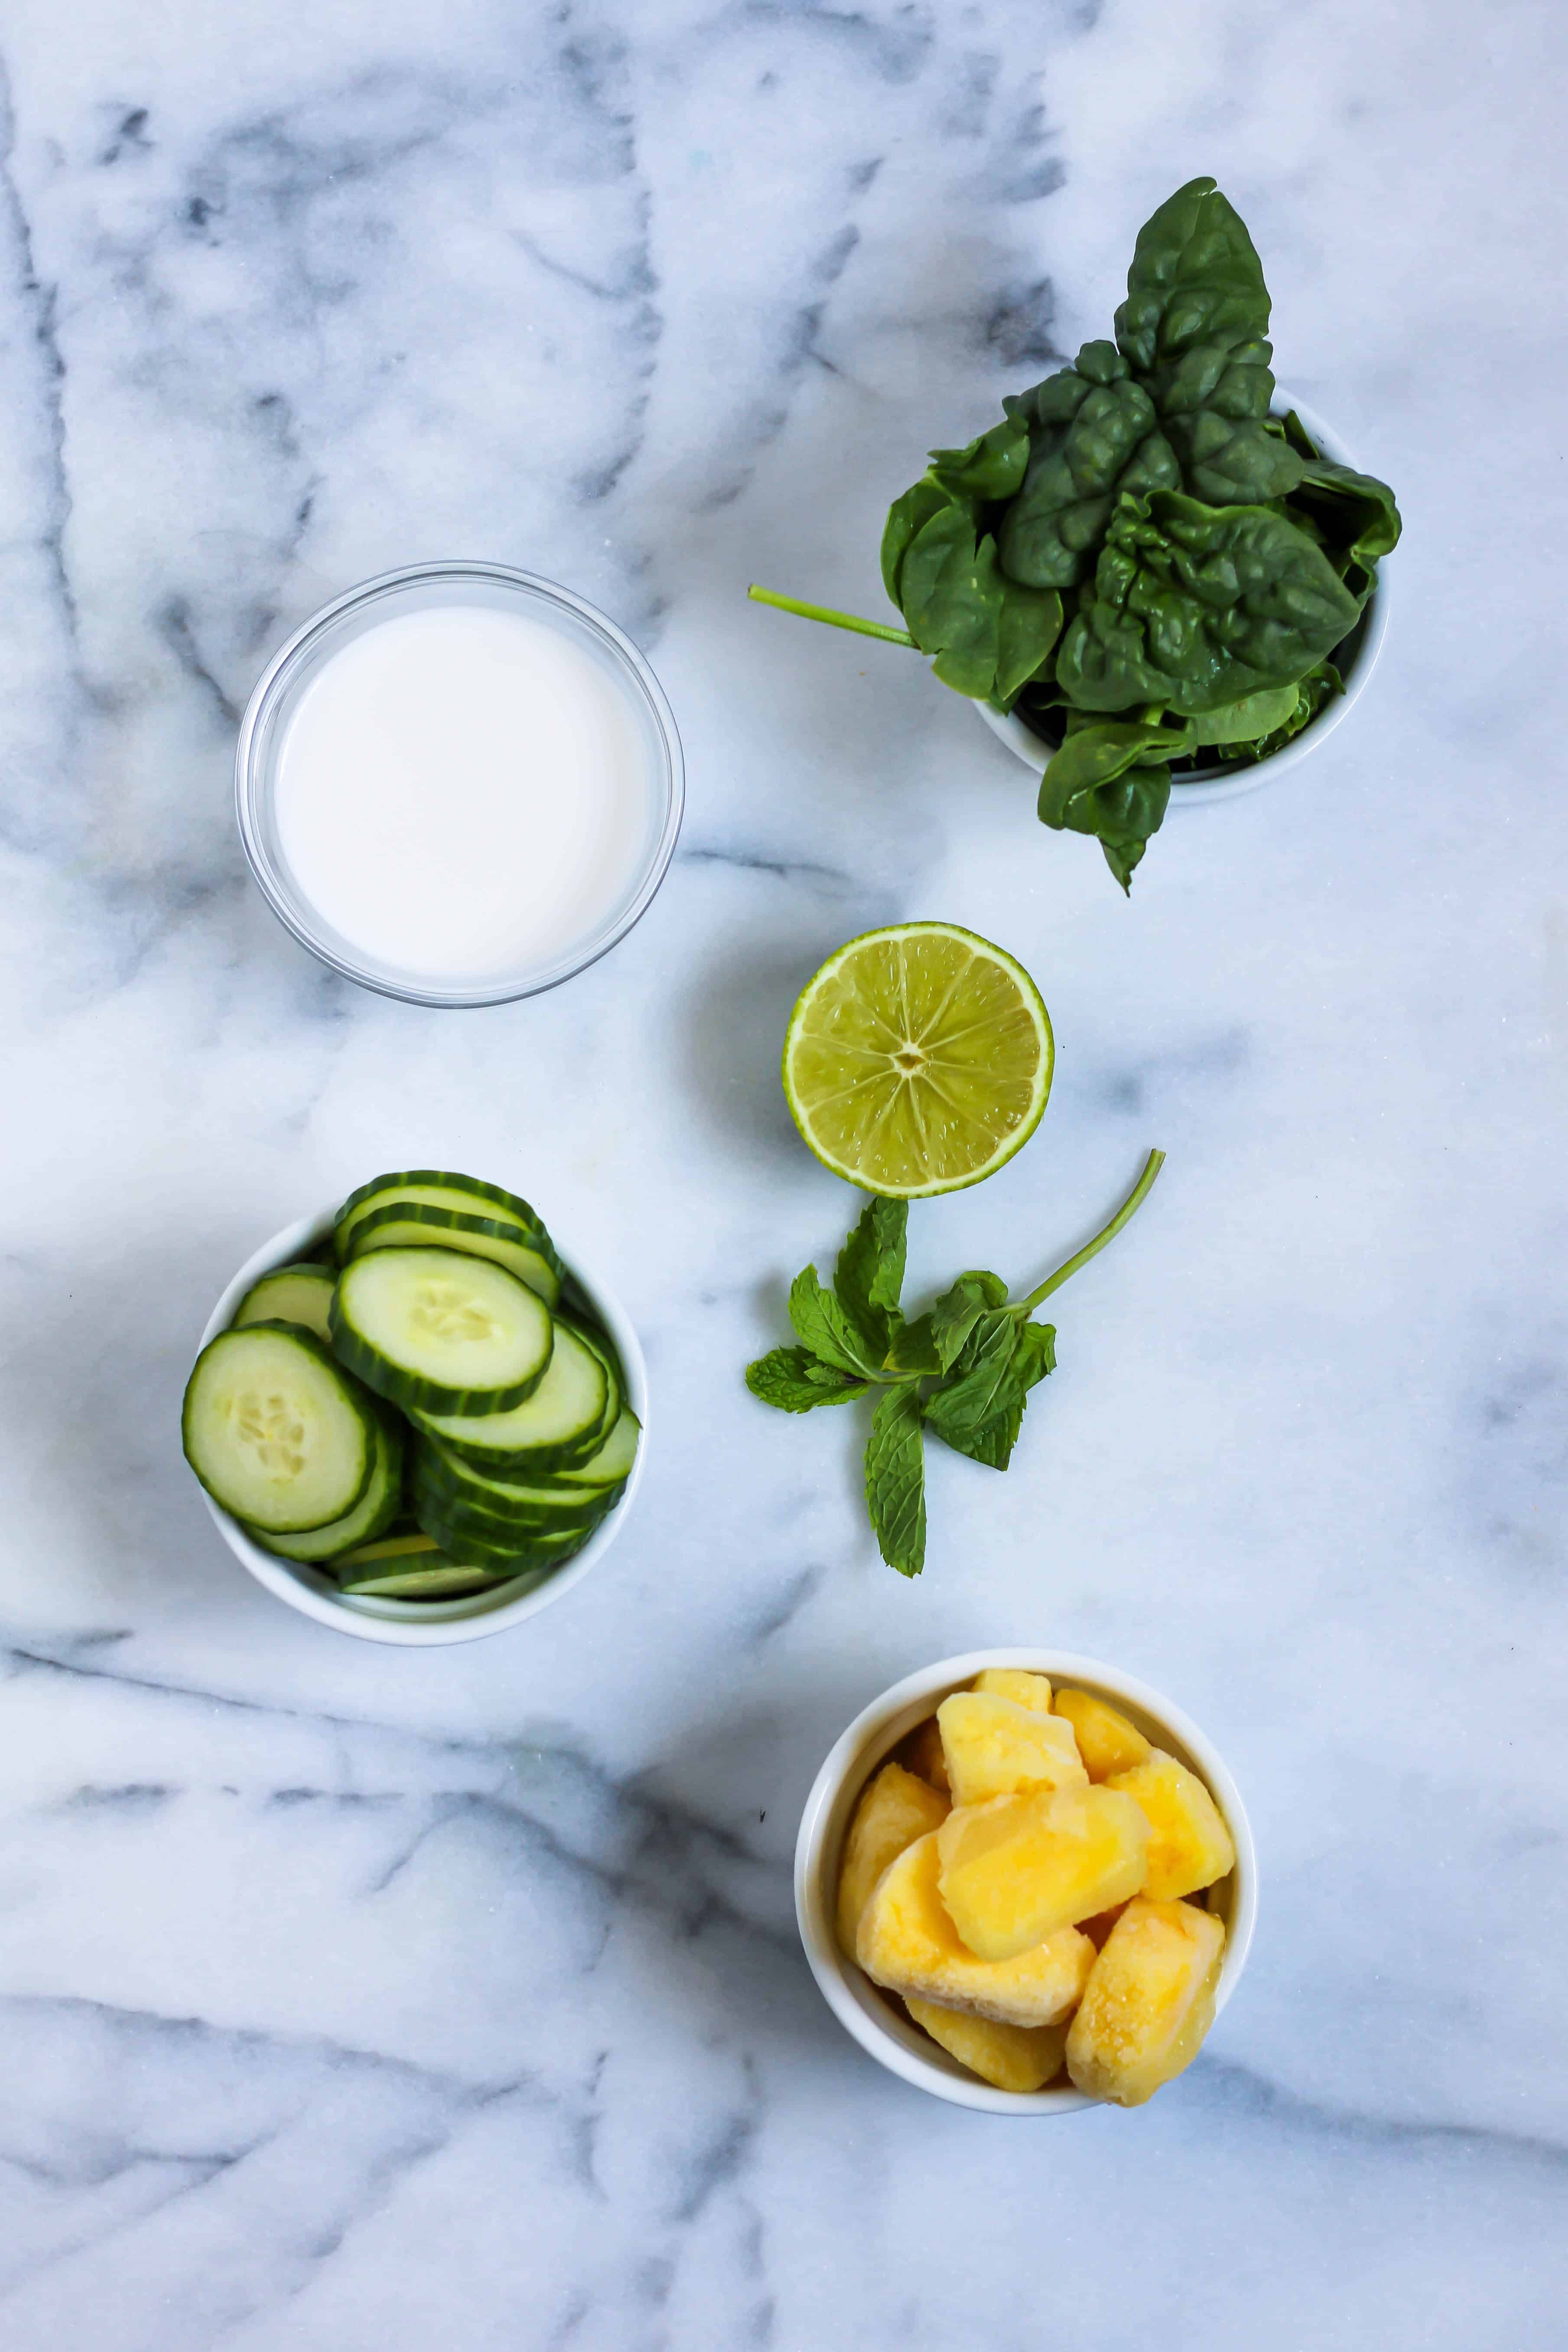 Ingredients to Make a Cucumber Pineapple Smoothie